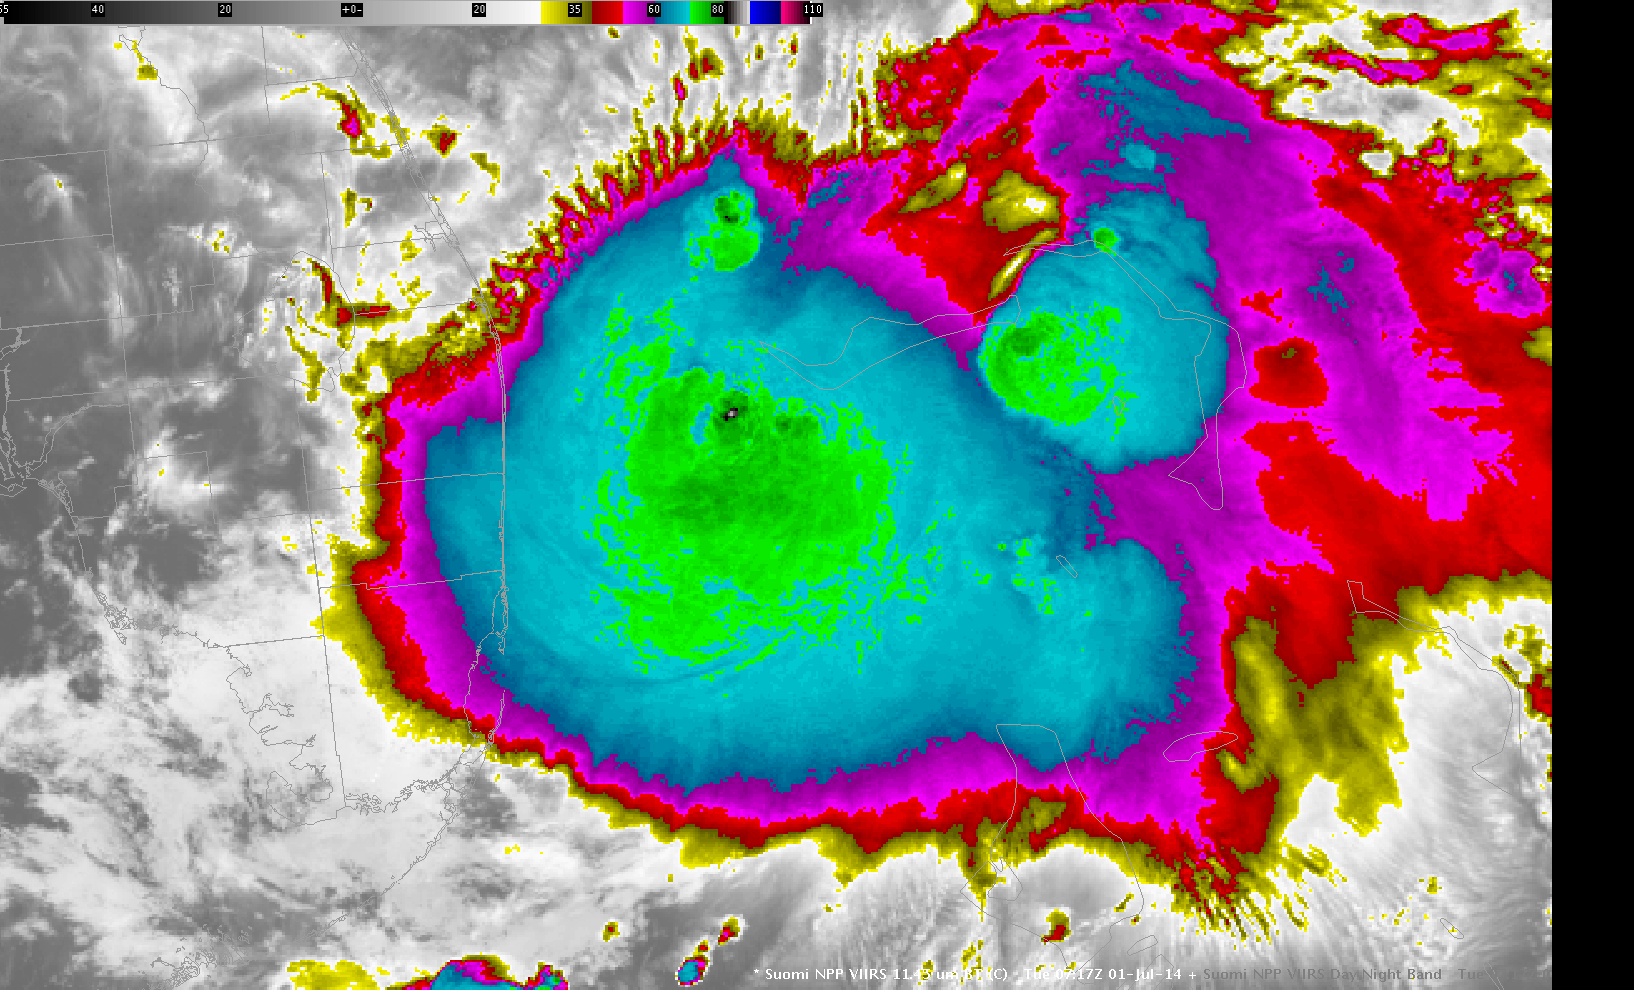 Suomi NPP VIIRS 11.35 µm infrared imagery, Day/Night Band imagery (0.70 µm) and lightning data at ~0715 UTC on 1 July 2014 (click to toggle through images)